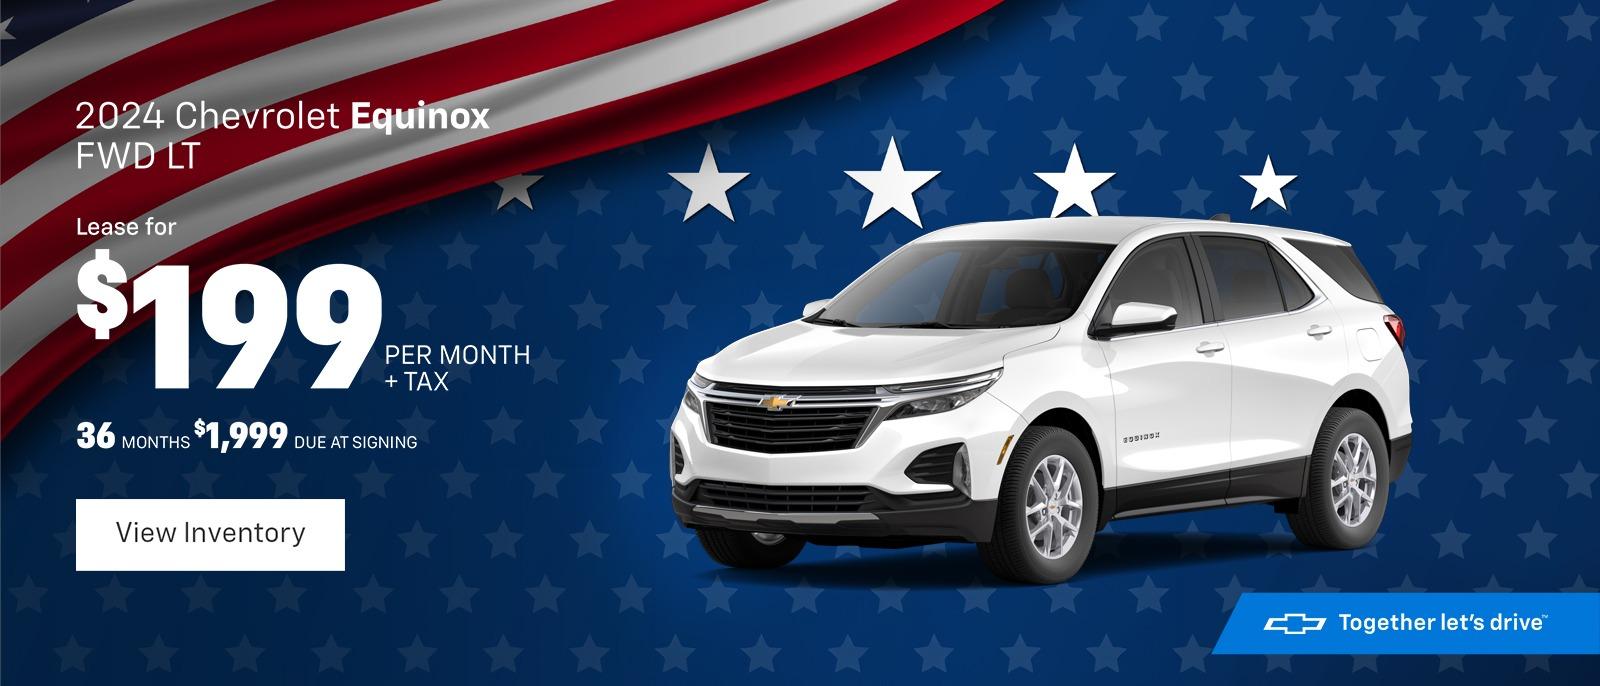 2024 Chevrolet Equinox FWD LT Lease for $199 36 MONTHS $1,999 DUE AT SIGNING PER MONTH + TAX